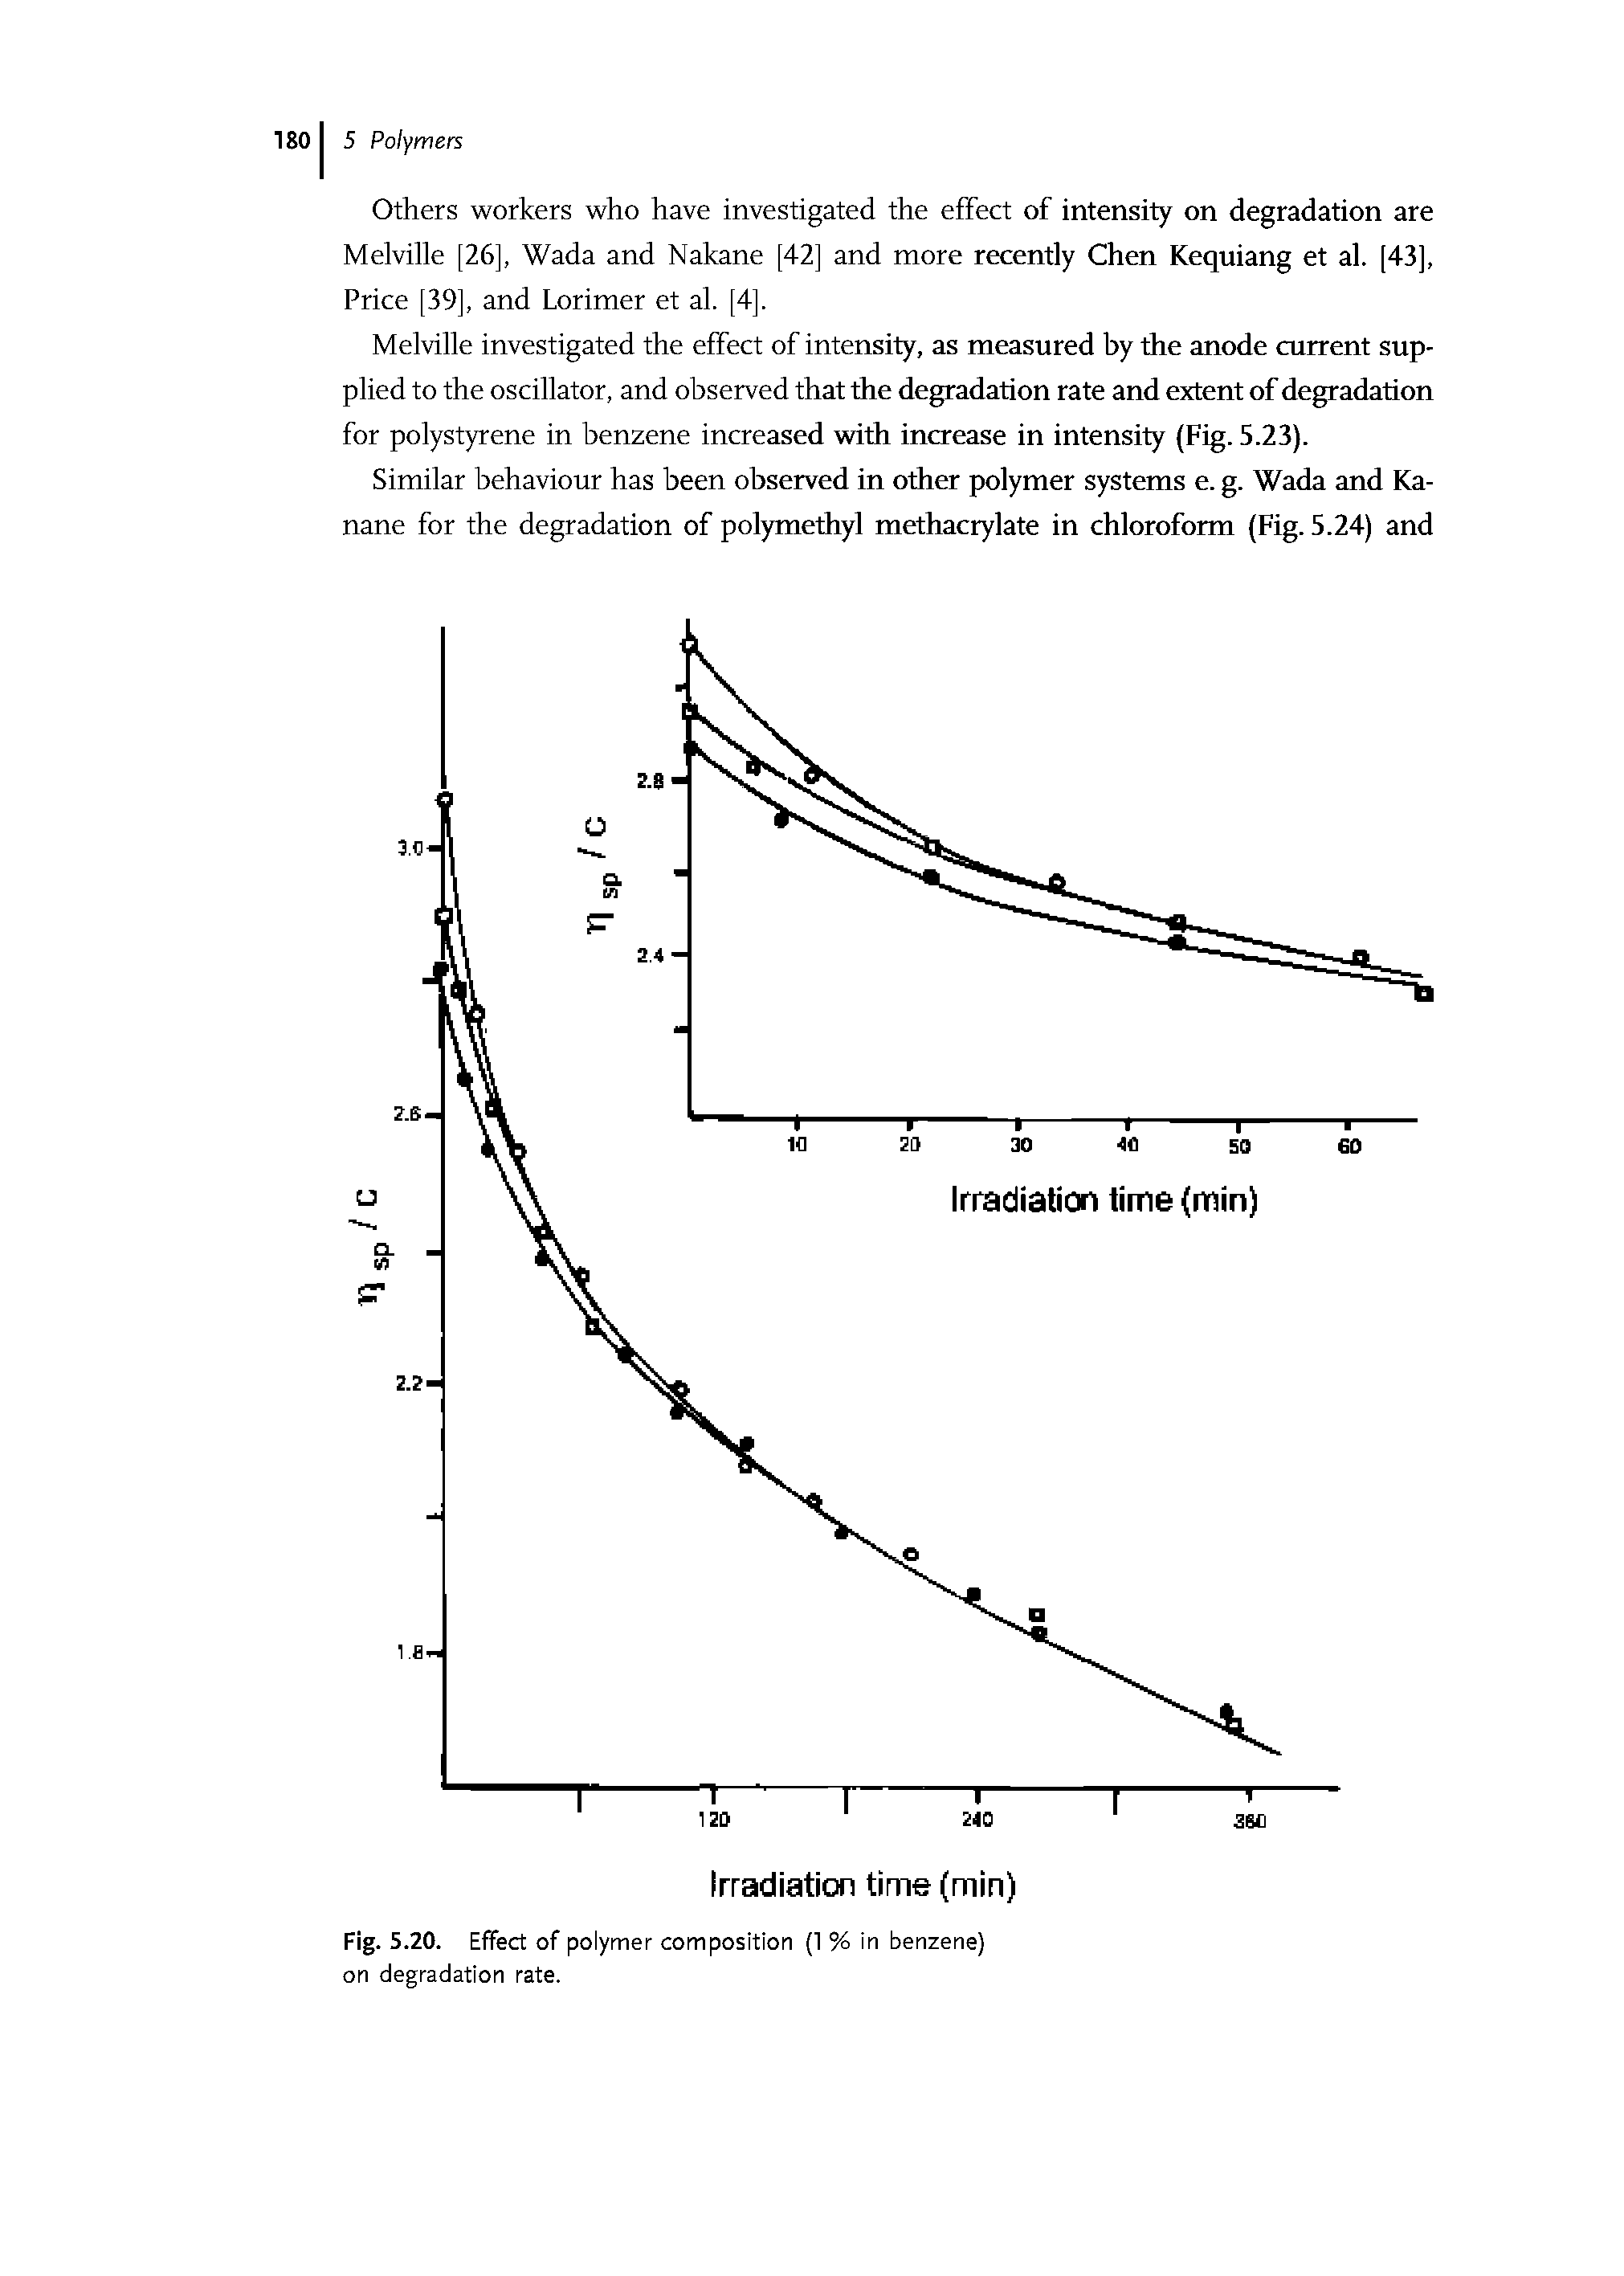 Fig. 5.20. Effect of polymer composition (1 % in benzene) on degradation rate.